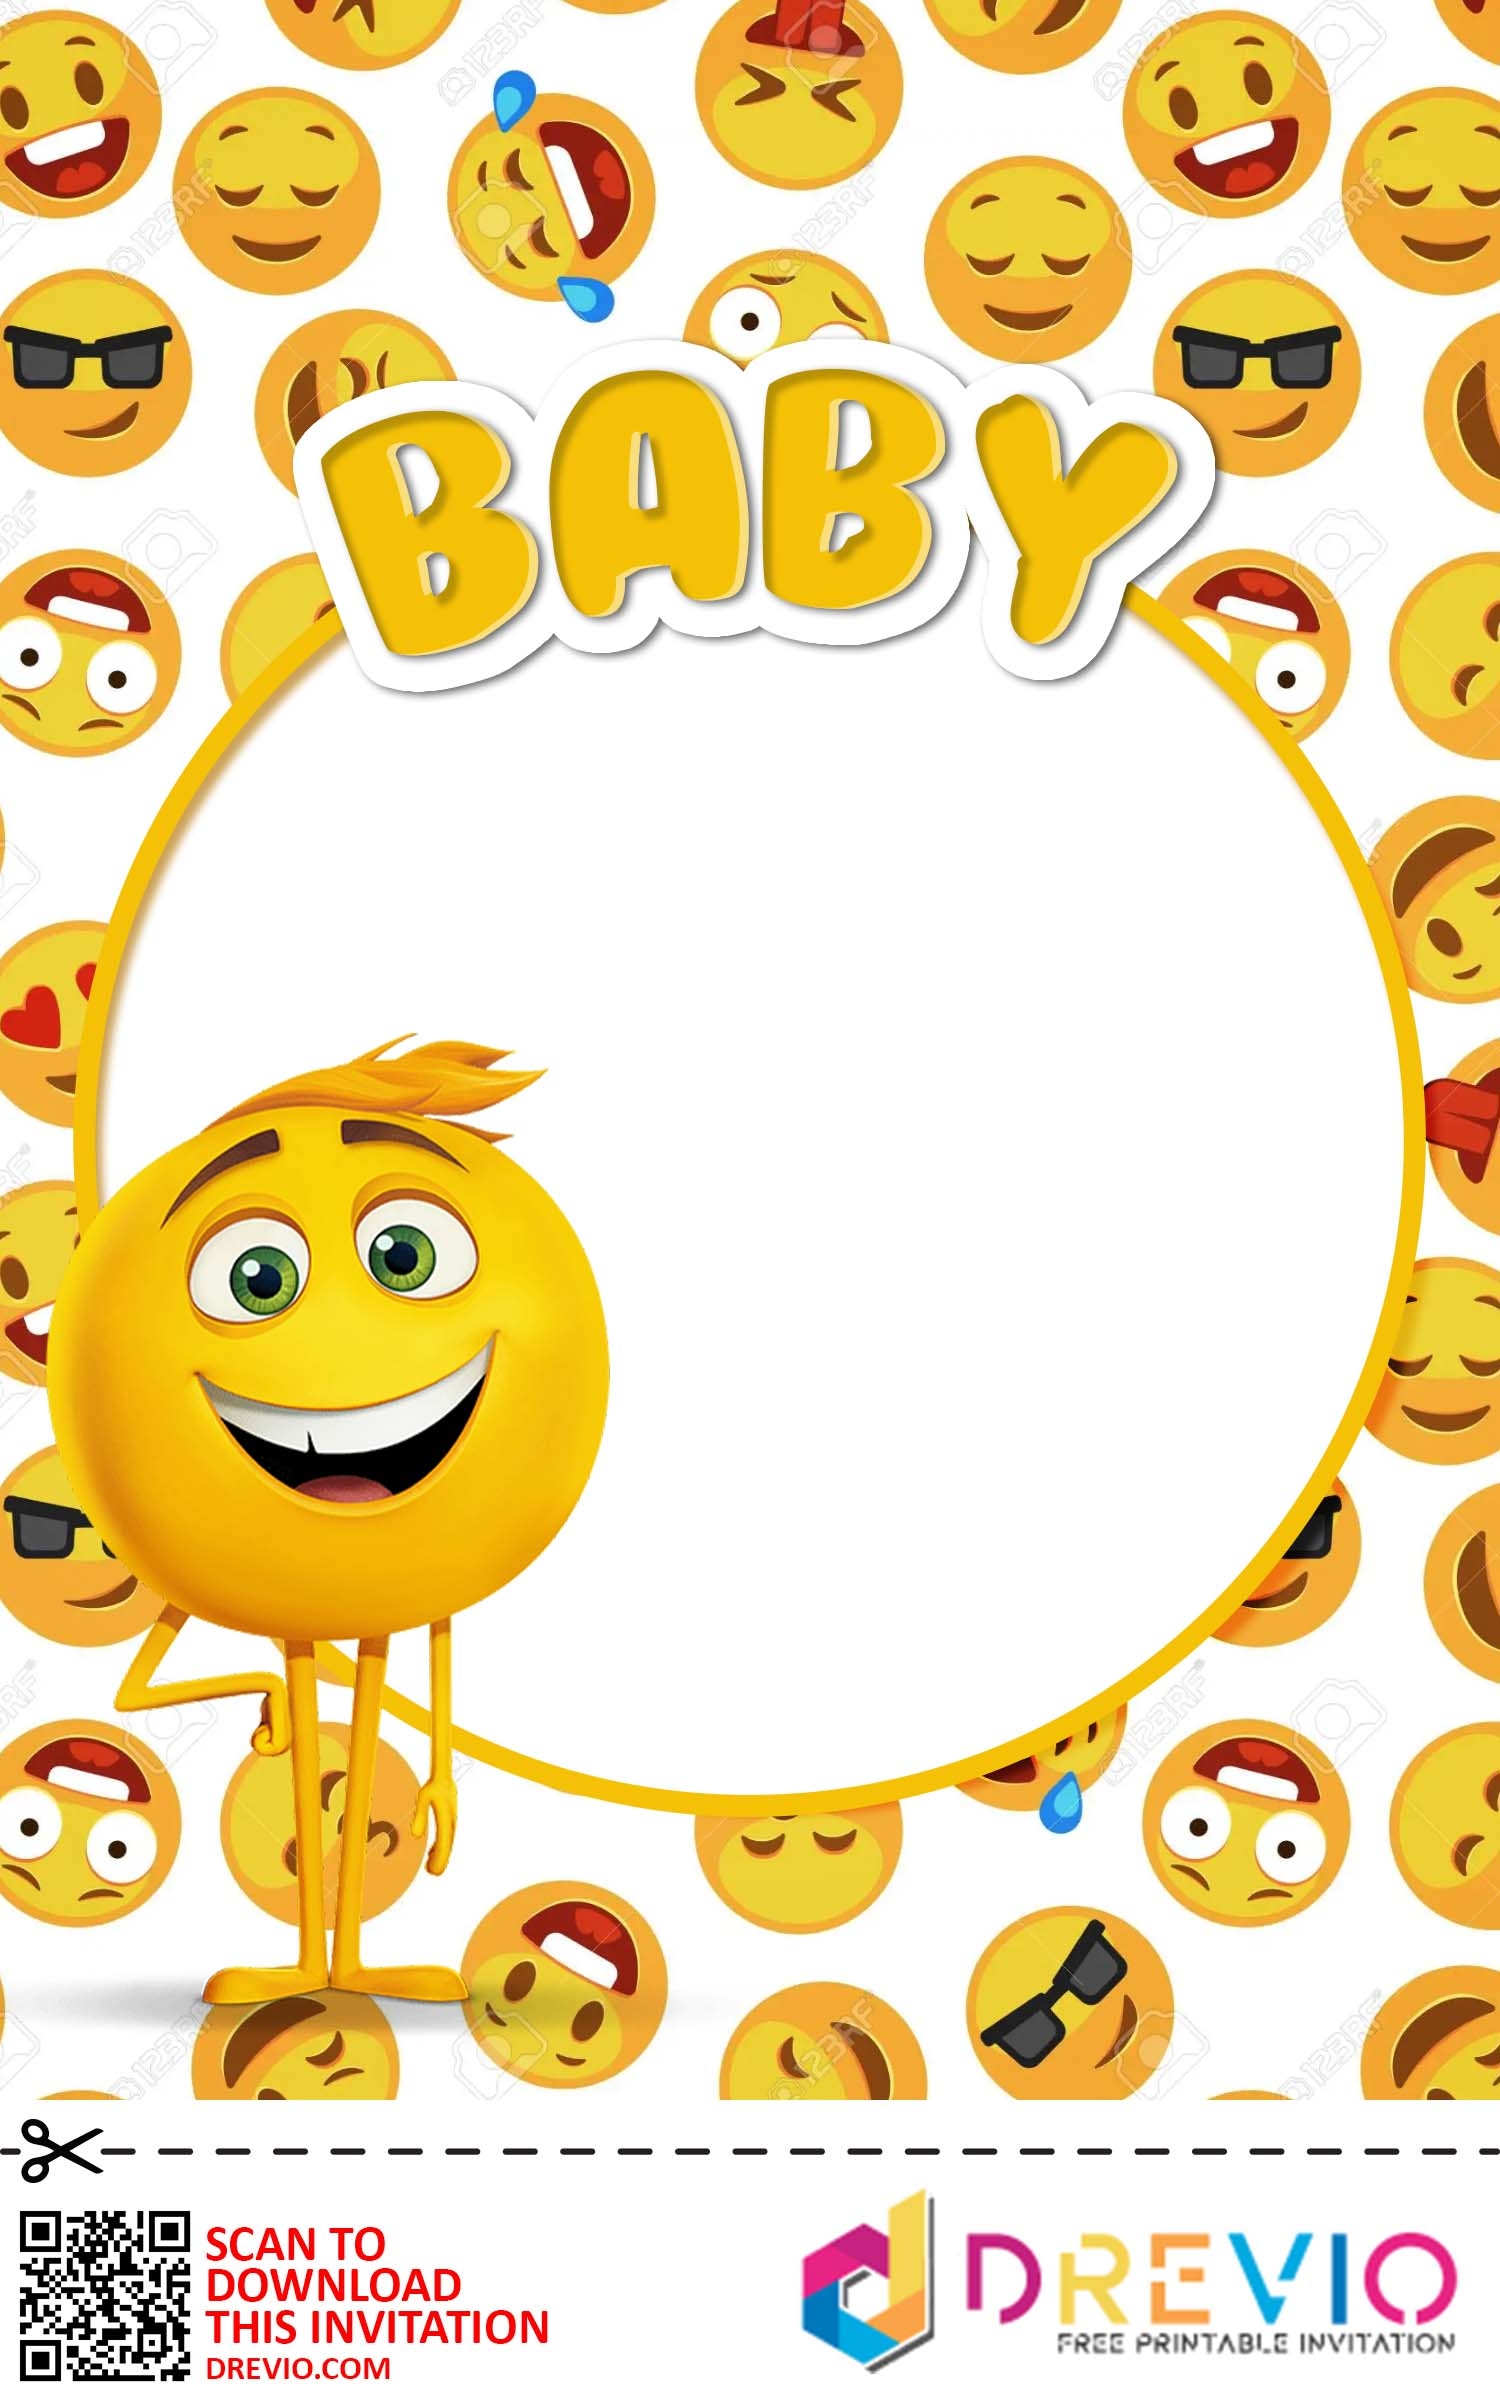  FREE INVITATIONS The Emoji Baby Shower Invitations Party Ideas Download Hundreds FREE PRINTABLE Birthday Invitation Templates - Emoji Invitations Printable Free